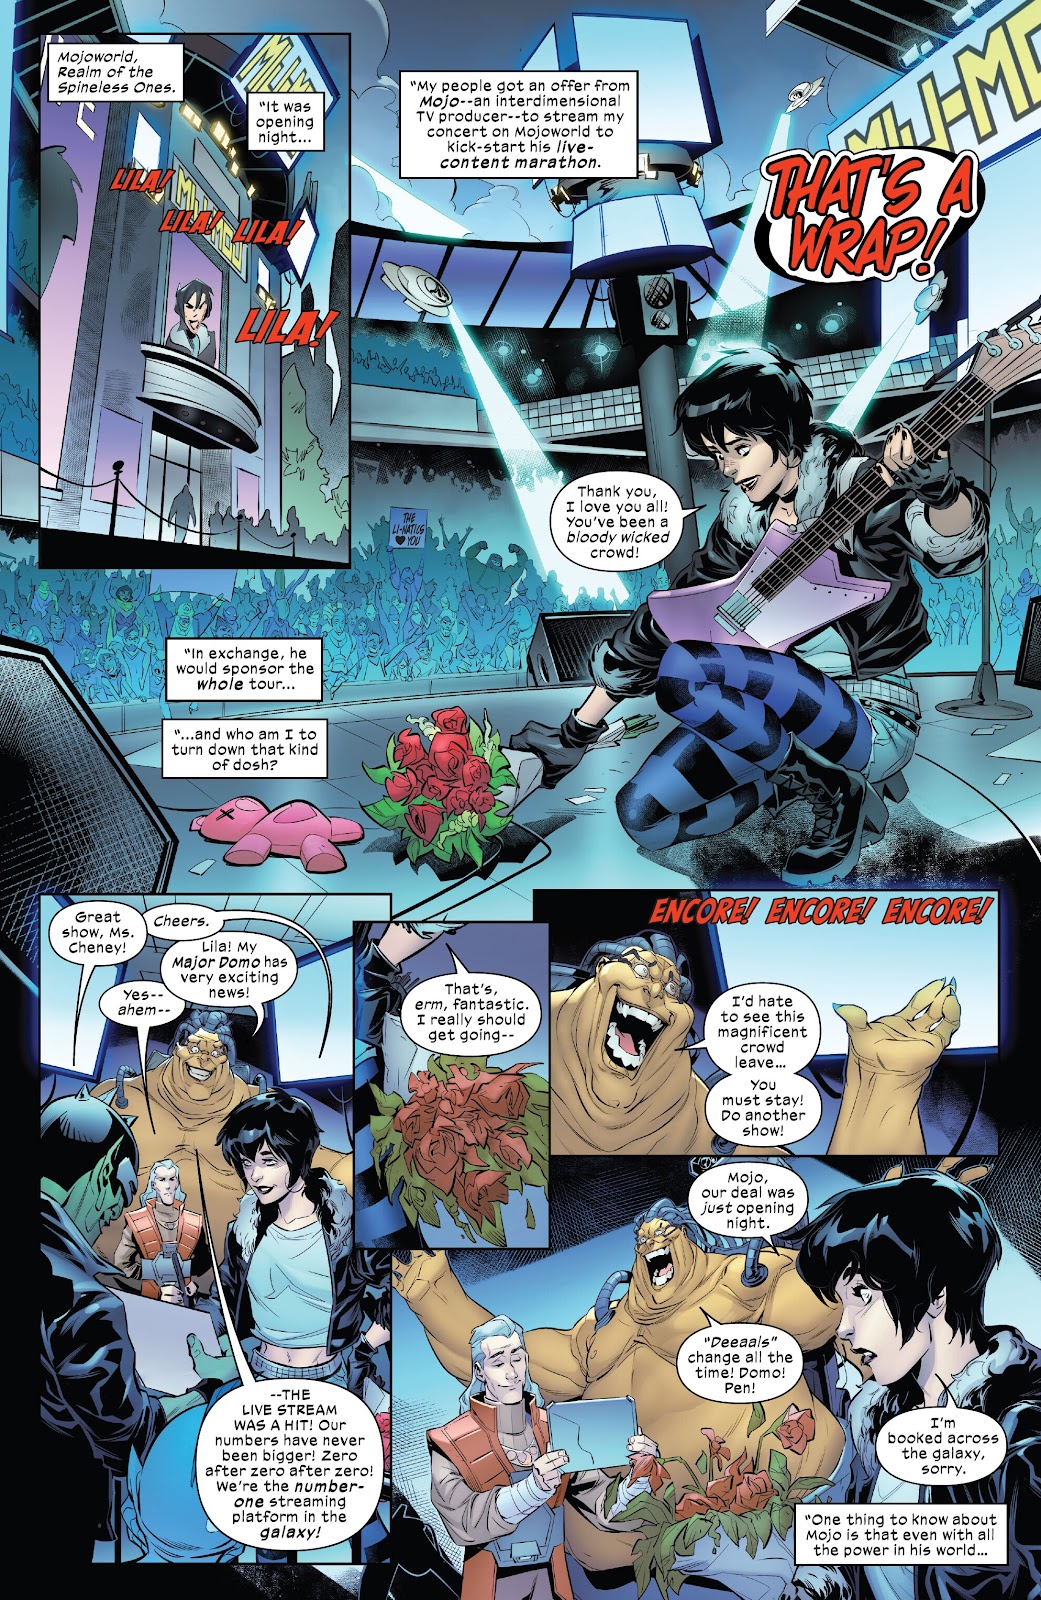 Ms. Marvel: Mutant Menace issue 2 - Page 3